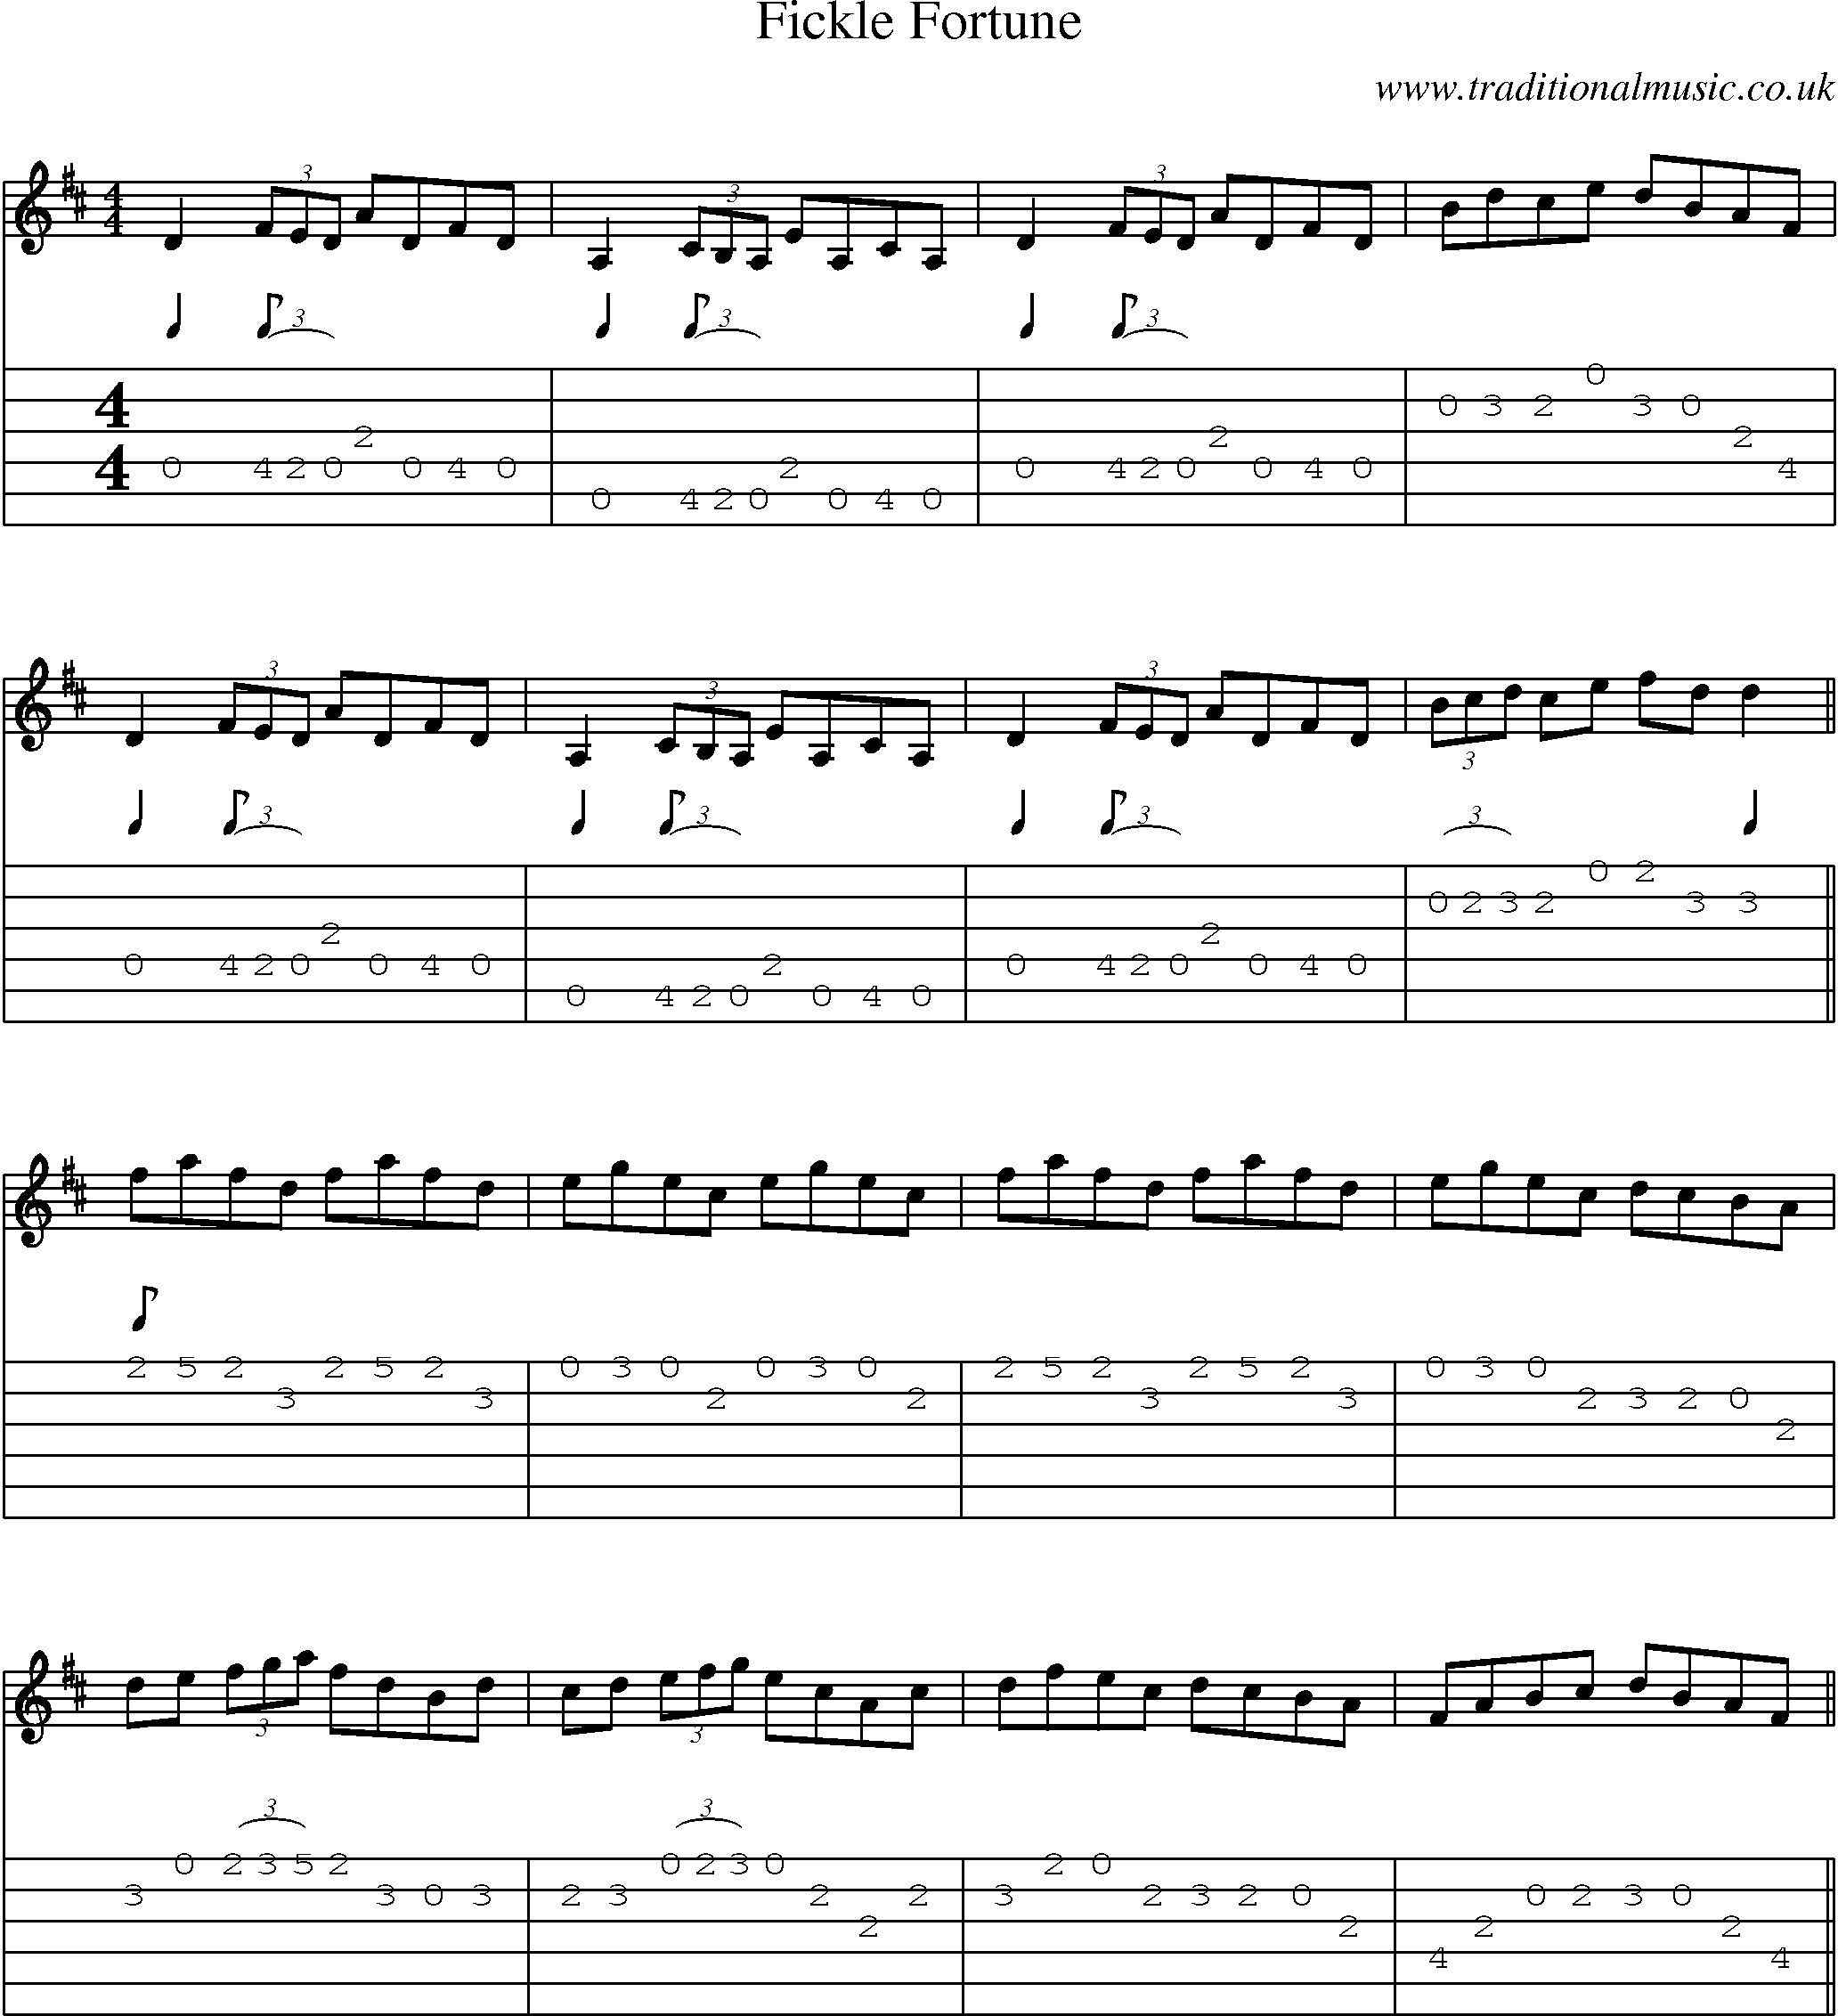 Music Score and Guitar Tabs for Fickle Fortune